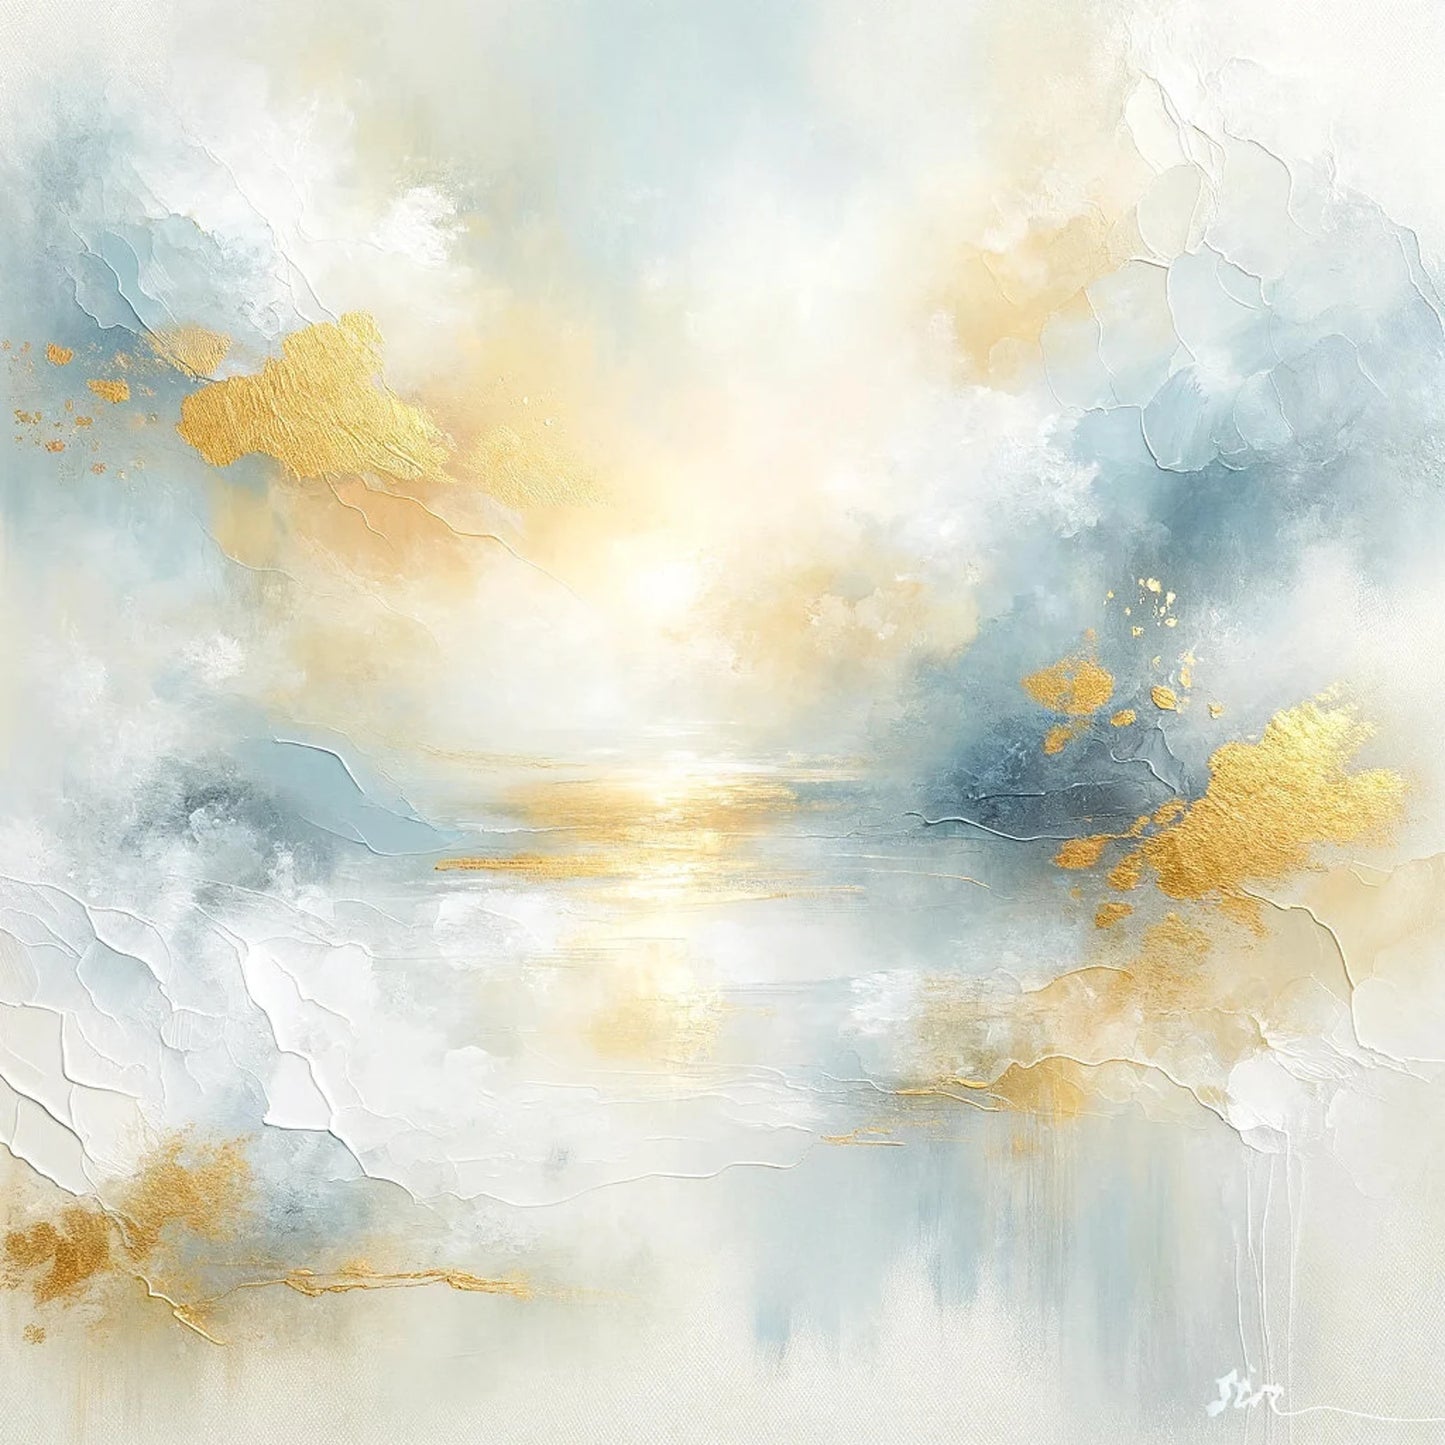 Golden Hues of Serenity: Abstract Landscape, Textured Canvas Art – Contemporary Wall Decor for Modern Homes